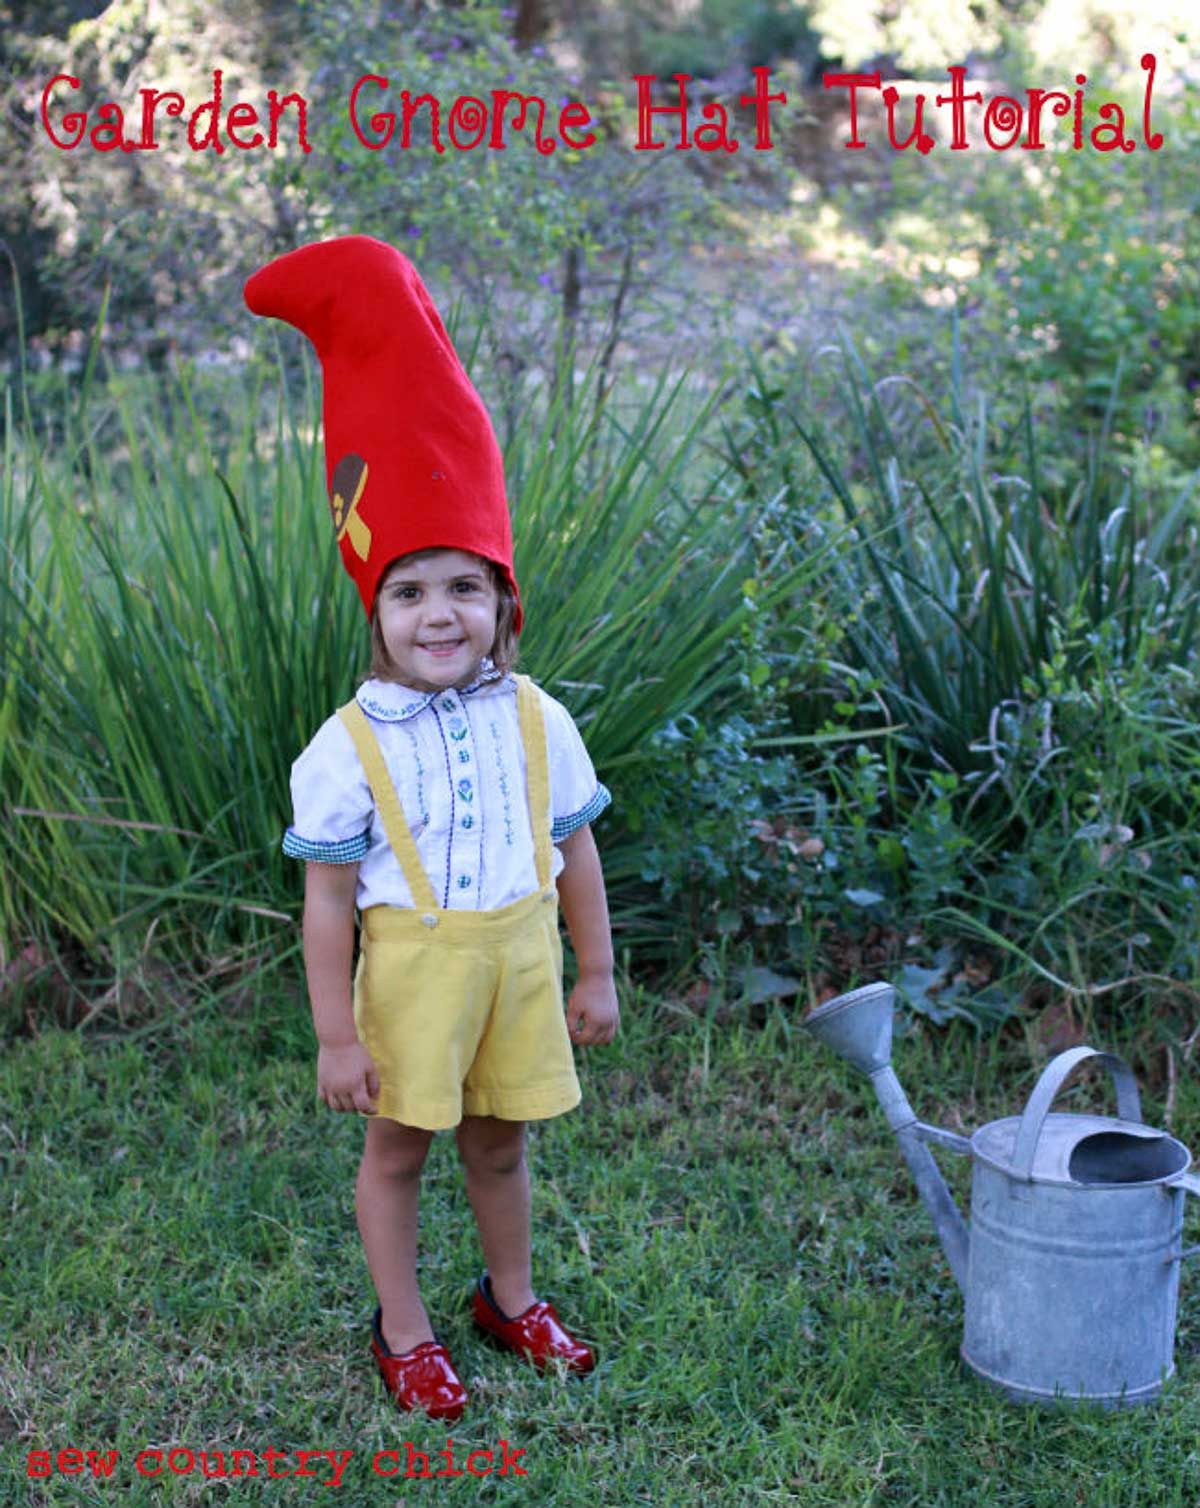 Cute little child dressed in yellow shorts with suspenders and a red DIY garden gnome hat with a cute mushroom on it.